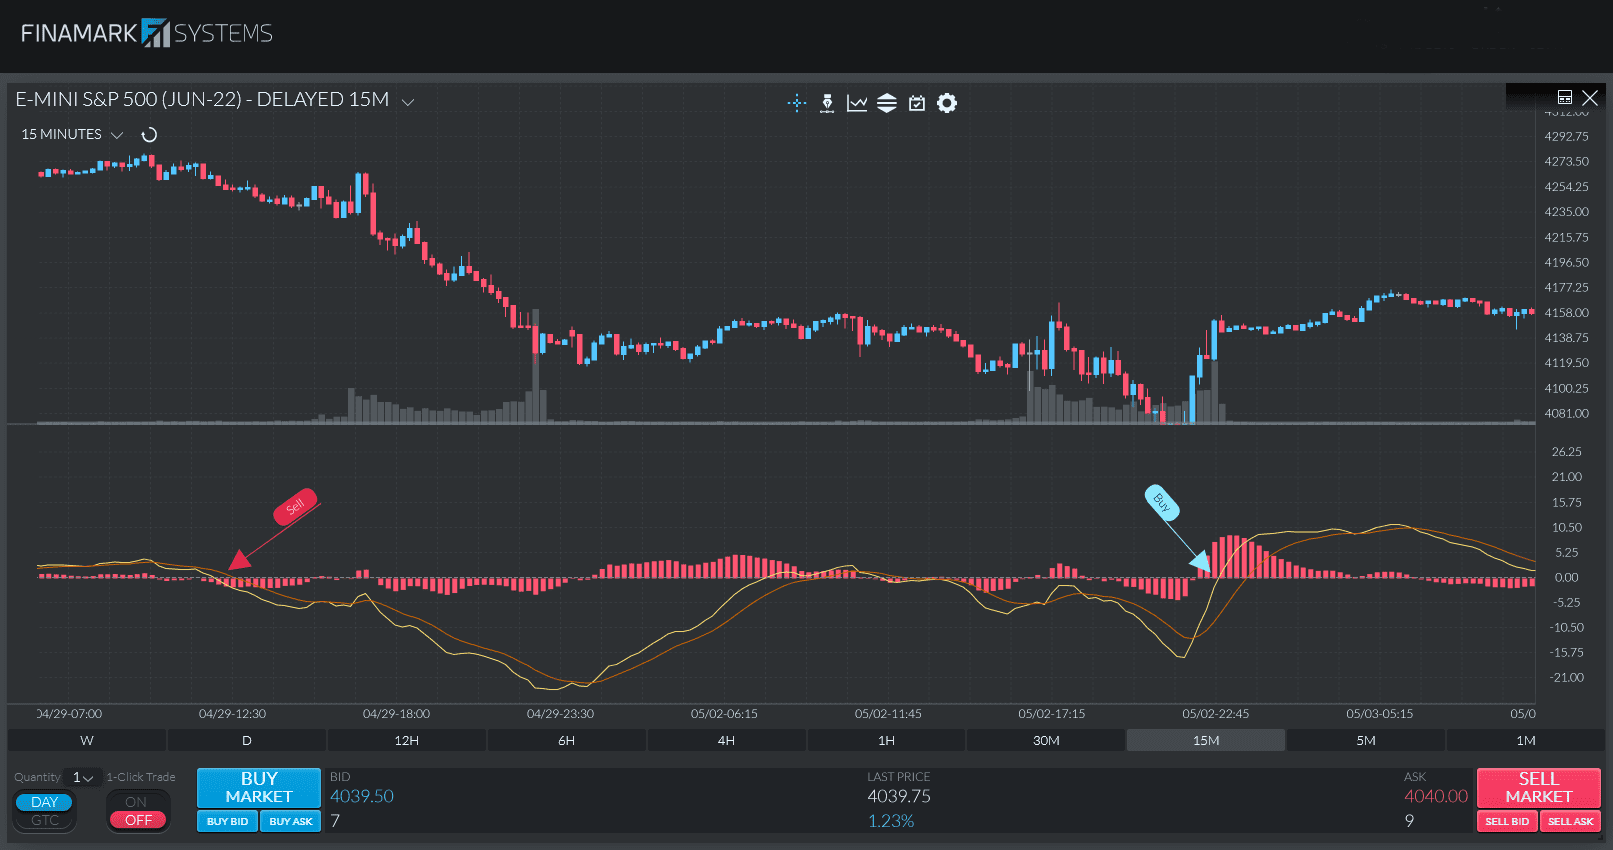 A chart showing the MACD line crossing above and below the zero line